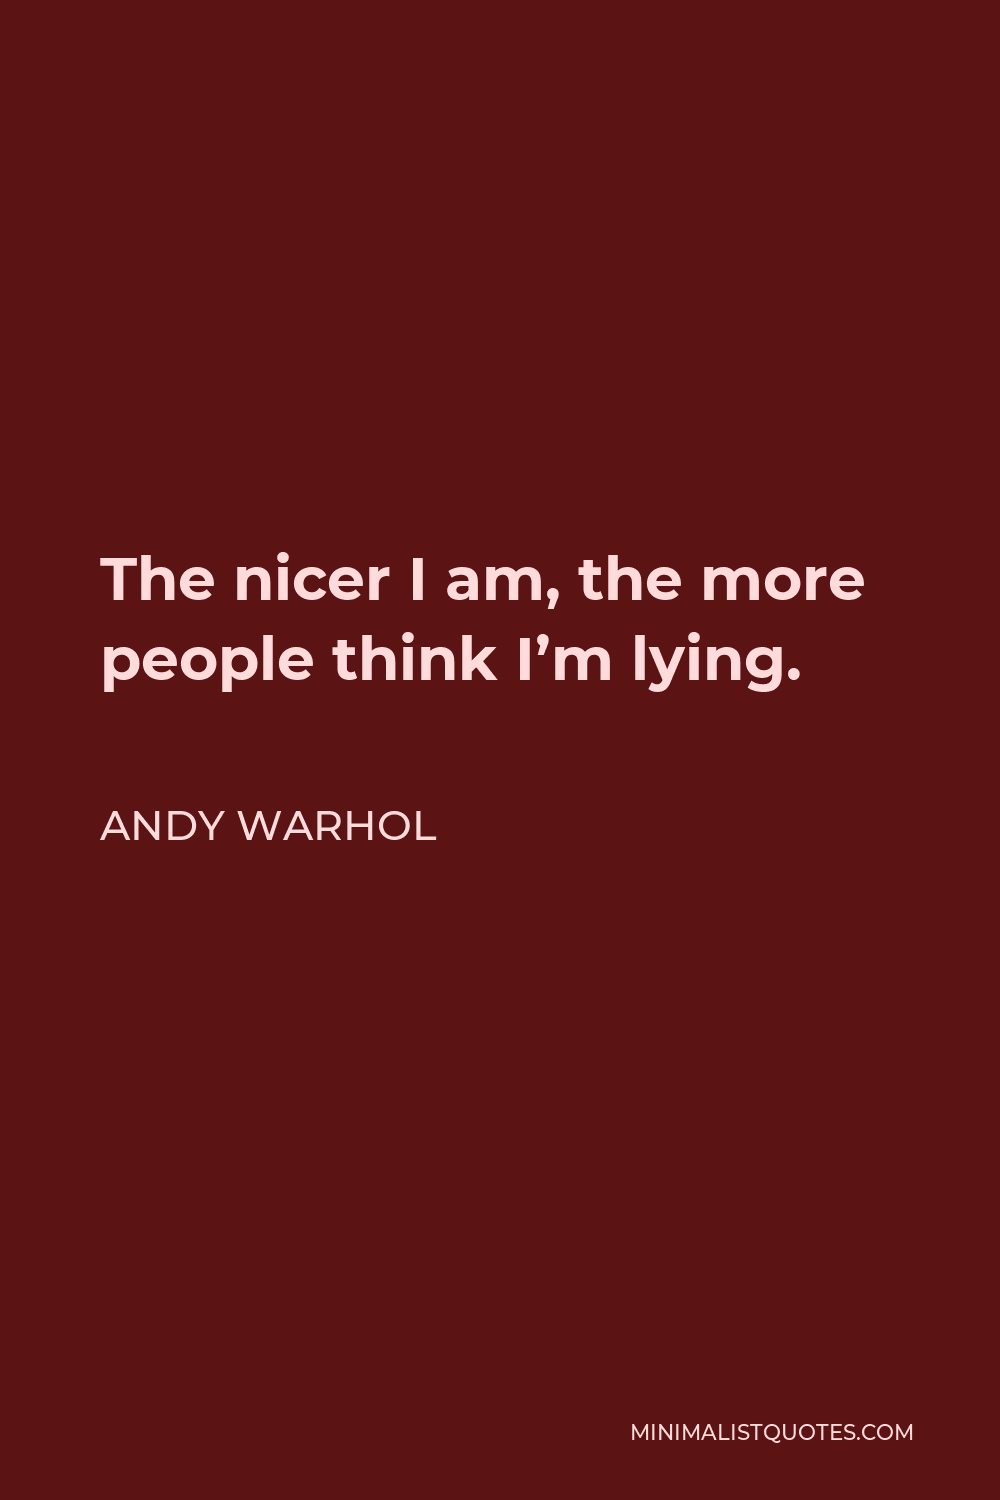 Andy Warhol Quote: The nicer I am, the more people think I'm lying.